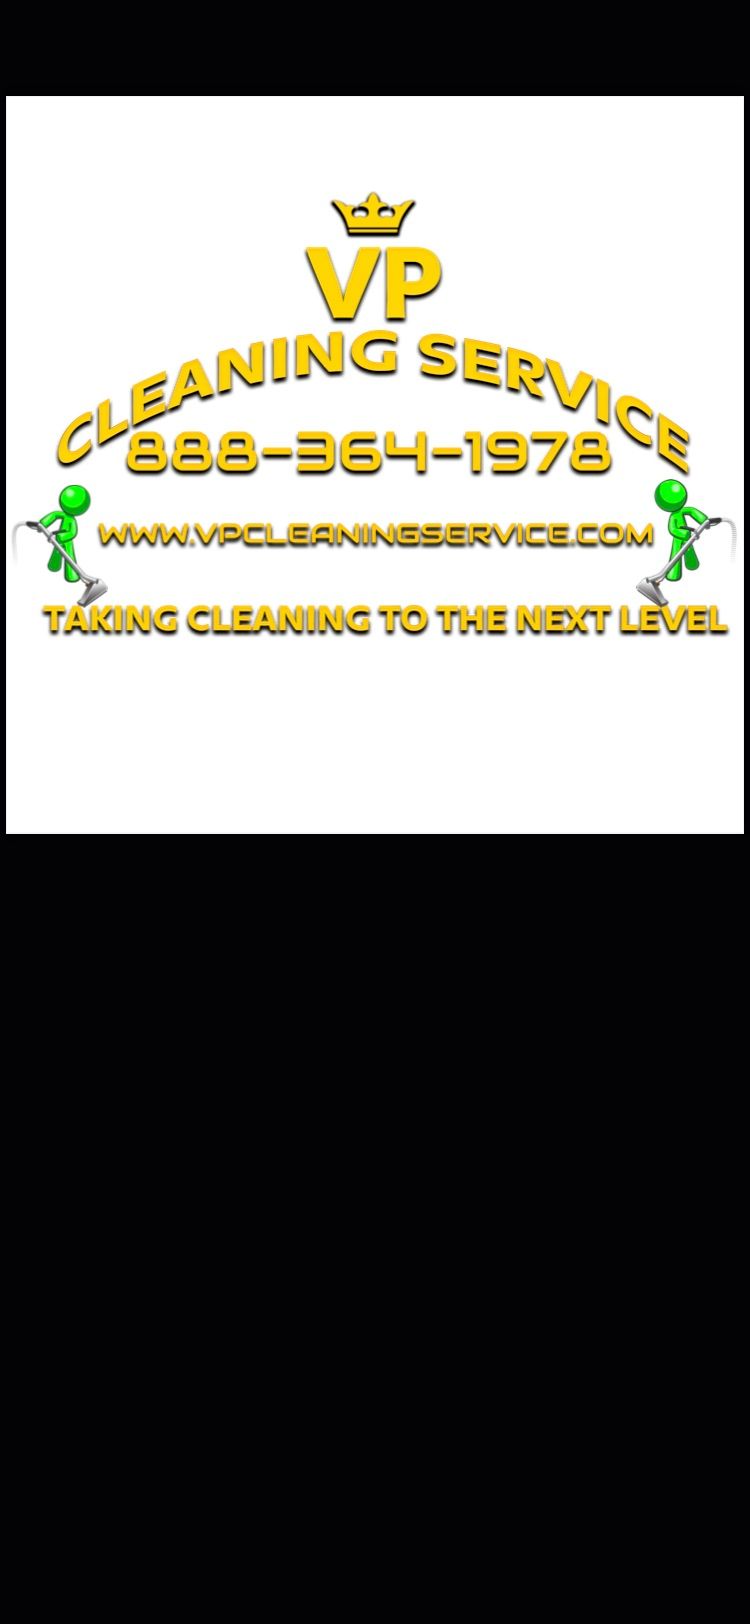 VP Cleaning Service